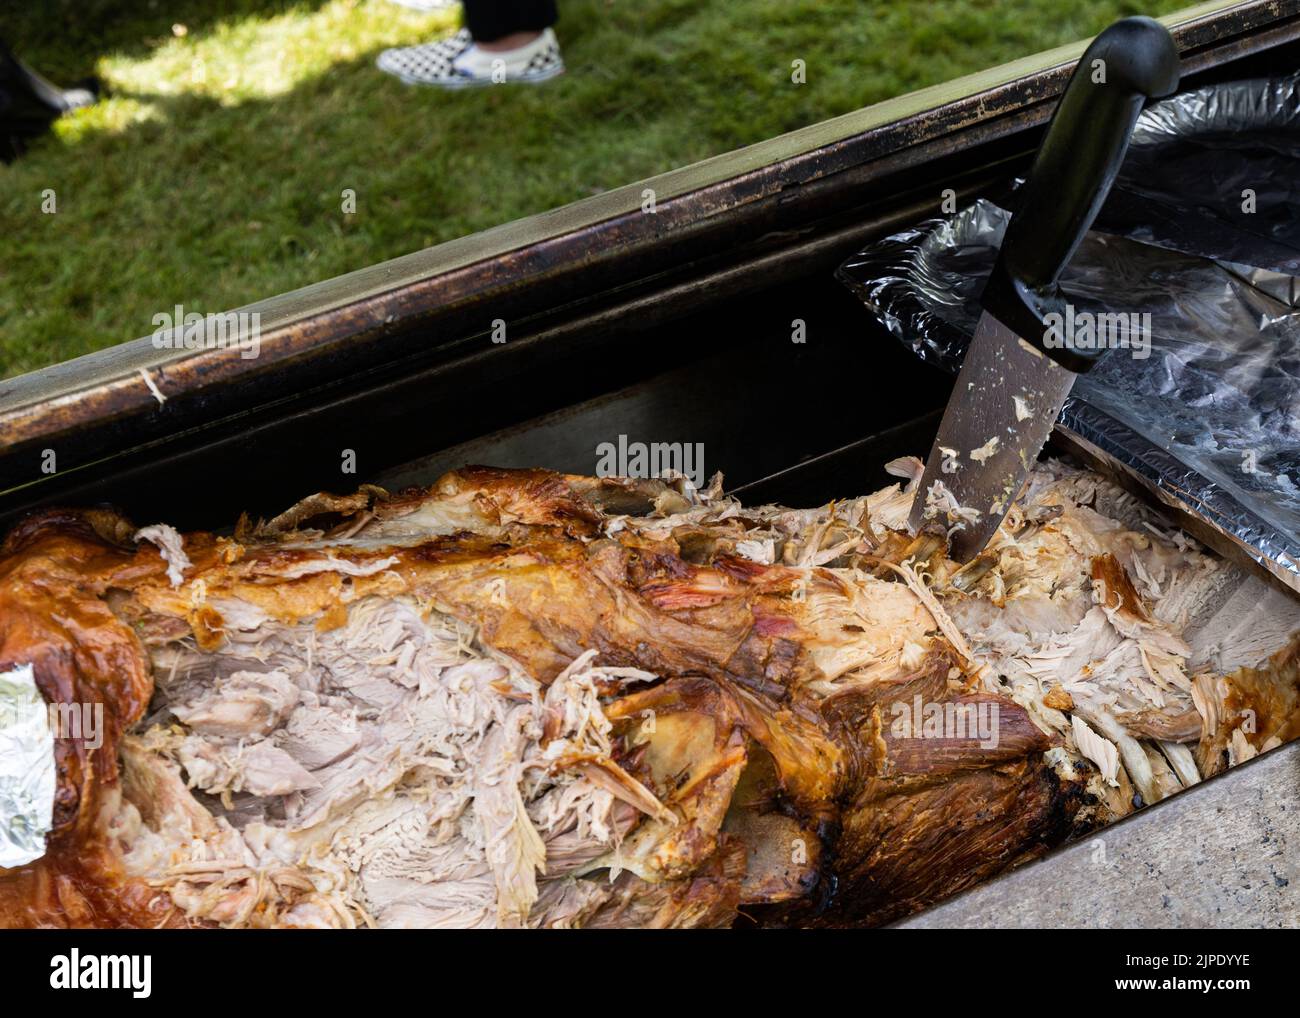 A partly carved hog roast at a Summer barbecue Stock Photo